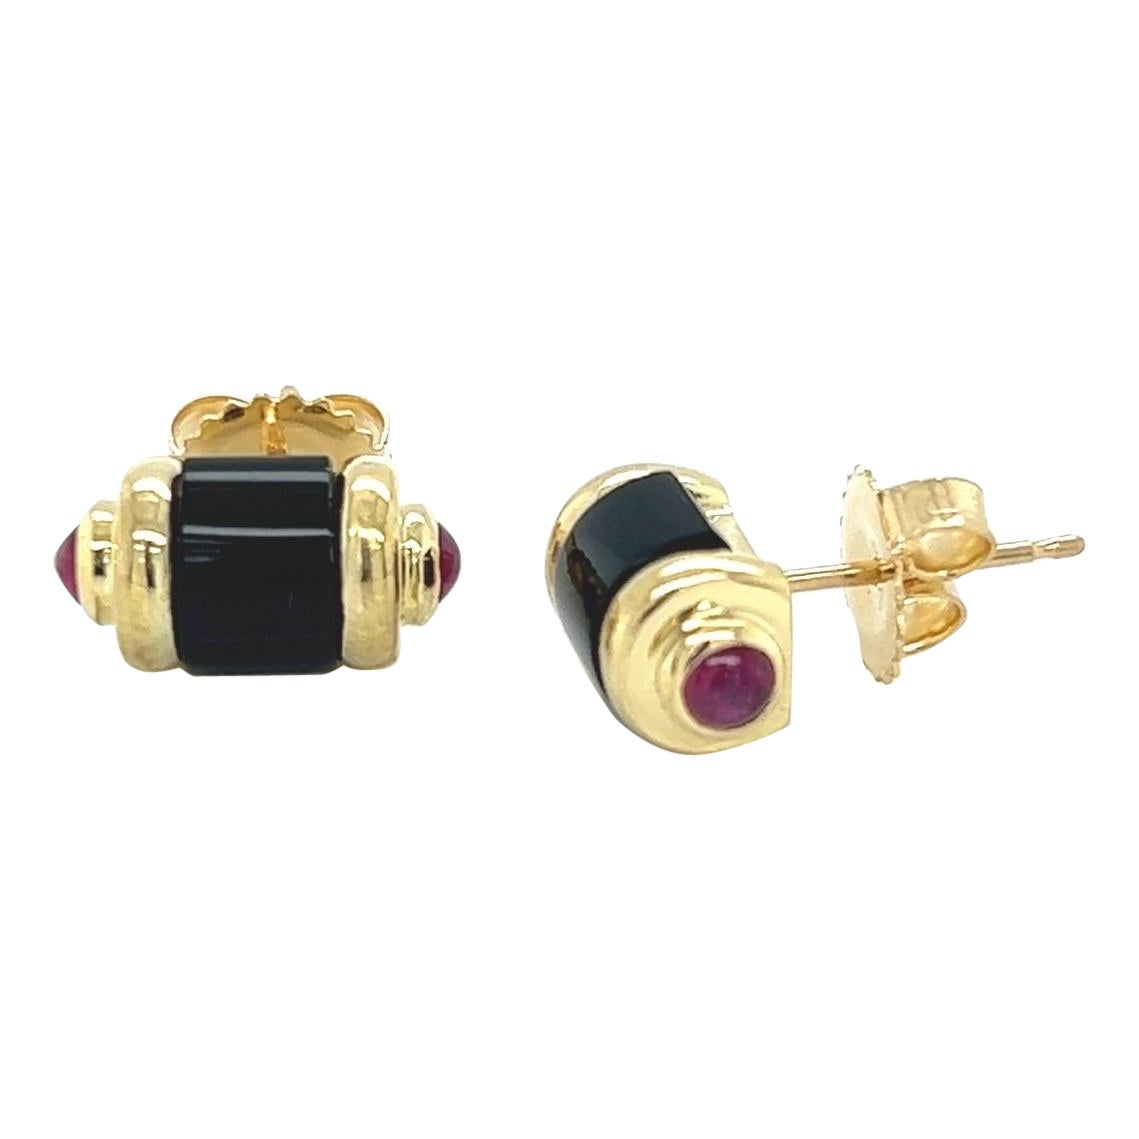 18k Yellow Gold Tube Stud Earrings with handcut Black Onyx and Cabochon Rubies For Sale